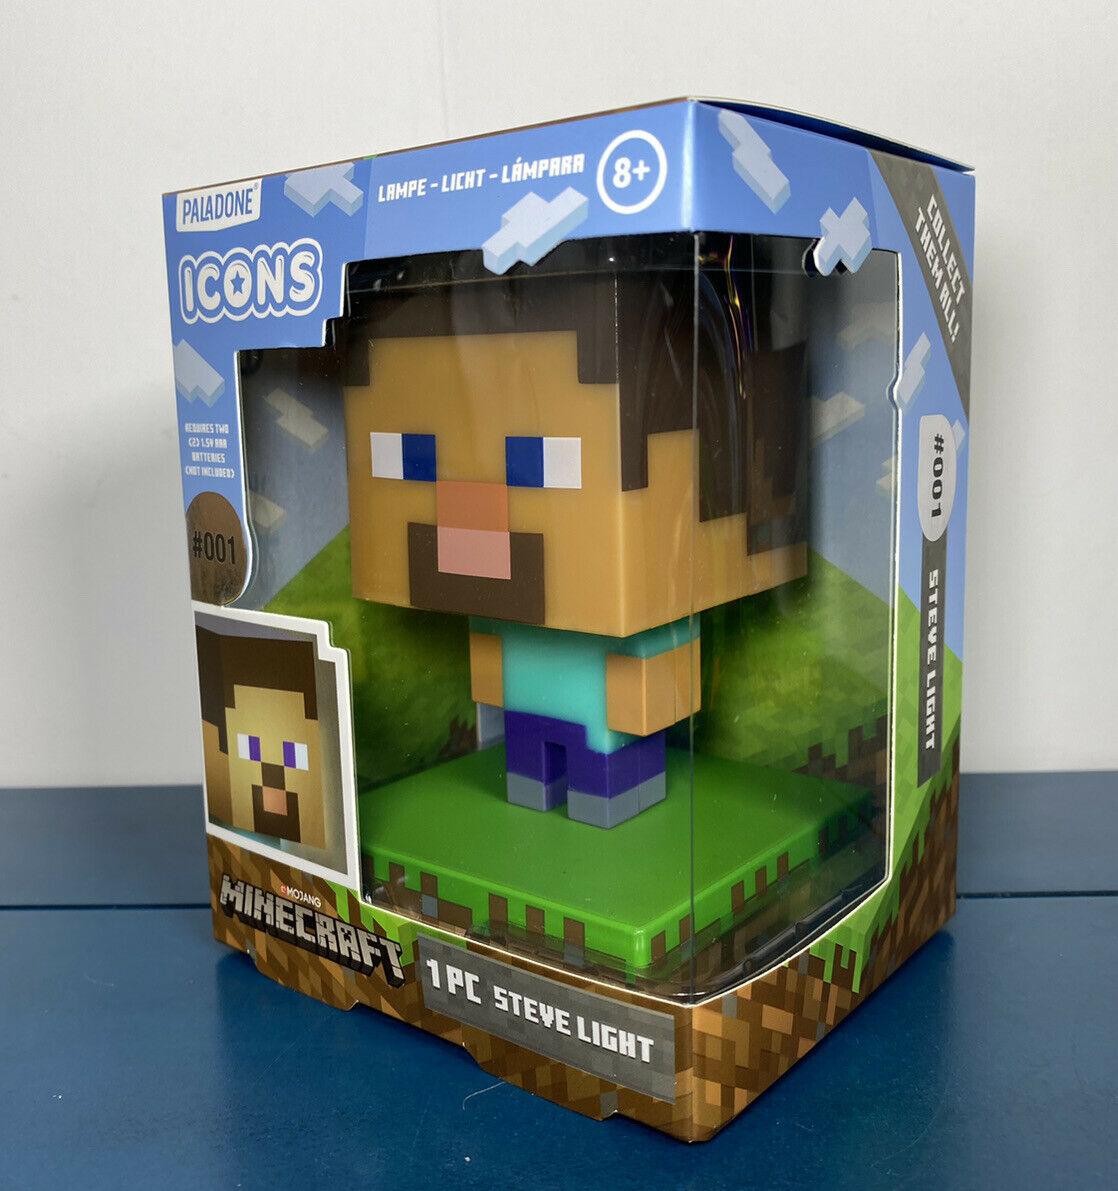 Store Steve Light – Lamp Character Minecraft Night 3D - Paladone Toy ICONS Florida Figure